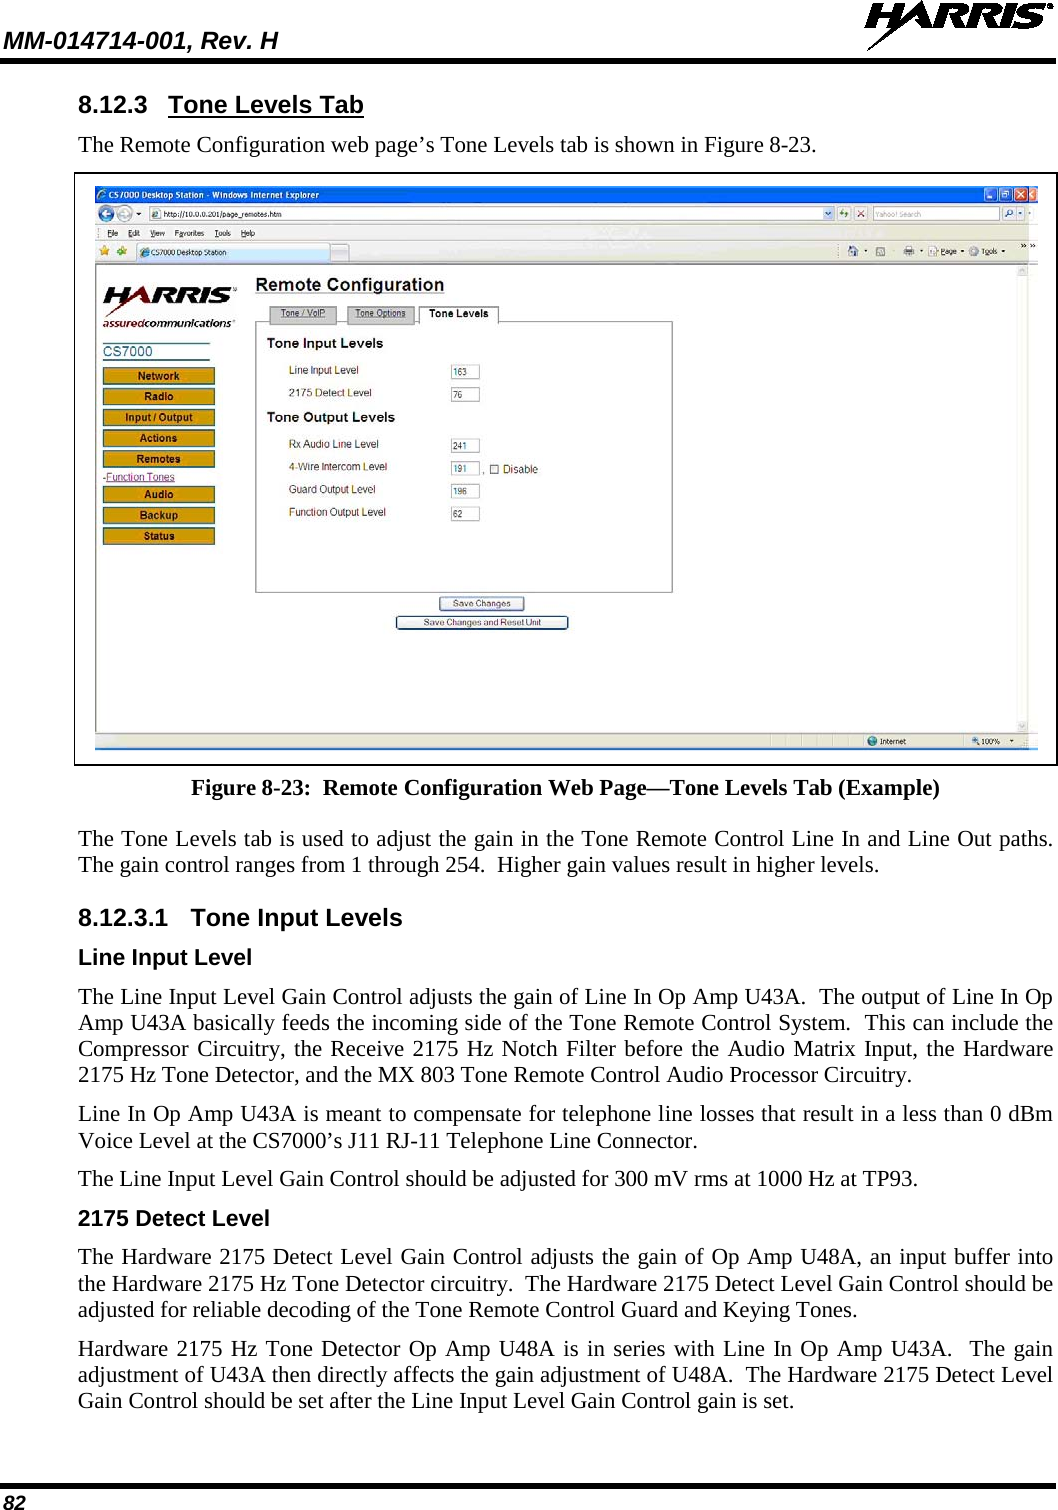 MM-014714-001, Rev. H   82 8.12.3 Tone Levels Tab The Remote Configuration web page’s Tone Levels tab is shown in Figure 8-23.   Figure 8-23:  Remote Configuration Web Page—Tone Levels Tab (Example) The Tone Levels tab is used to adjust the gain in the Tone Remote Control Line In and Line Out paths. The gain control ranges from 1 through 254.  Higher gain values result in higher levels.   8.12.3.1 Tone Input Levels Line Input Level The Line Input Level Gain Control adjusts the gain of Line In Op Amp U43A.  The output of Line In Op Amp U43A basically feeds the incoming side of the Tone Remote Control System.  This can include the Compressor Circuitry, the Receive 2175 Hz Notch Filter before the Audio Matrix Input, the Hardware 2175 Hz Tone Detector, and the MX 803 Tone Remote Control Audio Processor Circuitry. Line In Op Amp U43A is meant to compensate for telephone line losses that result in a less than 0 dBm Voice Level at the CS7000’s J11 RJ-11 Telephone Line Connector. The Line Input Level Gain Control should be adjusted for 300 mV rms at 1000 Hz at TP93. 2175 Detect Level The Hardware 2175 Detect Level Gain Control adjusts the gain of Op Amp U48A, an input buffer into the Hardware 2175 Hz Tone Detector circuitry.  The Hardware 2175 Detect Level Gain Control should be adjusted for reliable decoding of the Tone Remote Control Guard and Keying Tones. Hardware 2175 Hz Tone Detector Op Amp U48A is in series with Line In Op Amp U43A.  The gain adjustment of U43A then directly affects the gain adjustment of U48A.  The Hardware 2175 Detect Level Gain Control should be set after the Line Input Level Gain Control gain is set. 